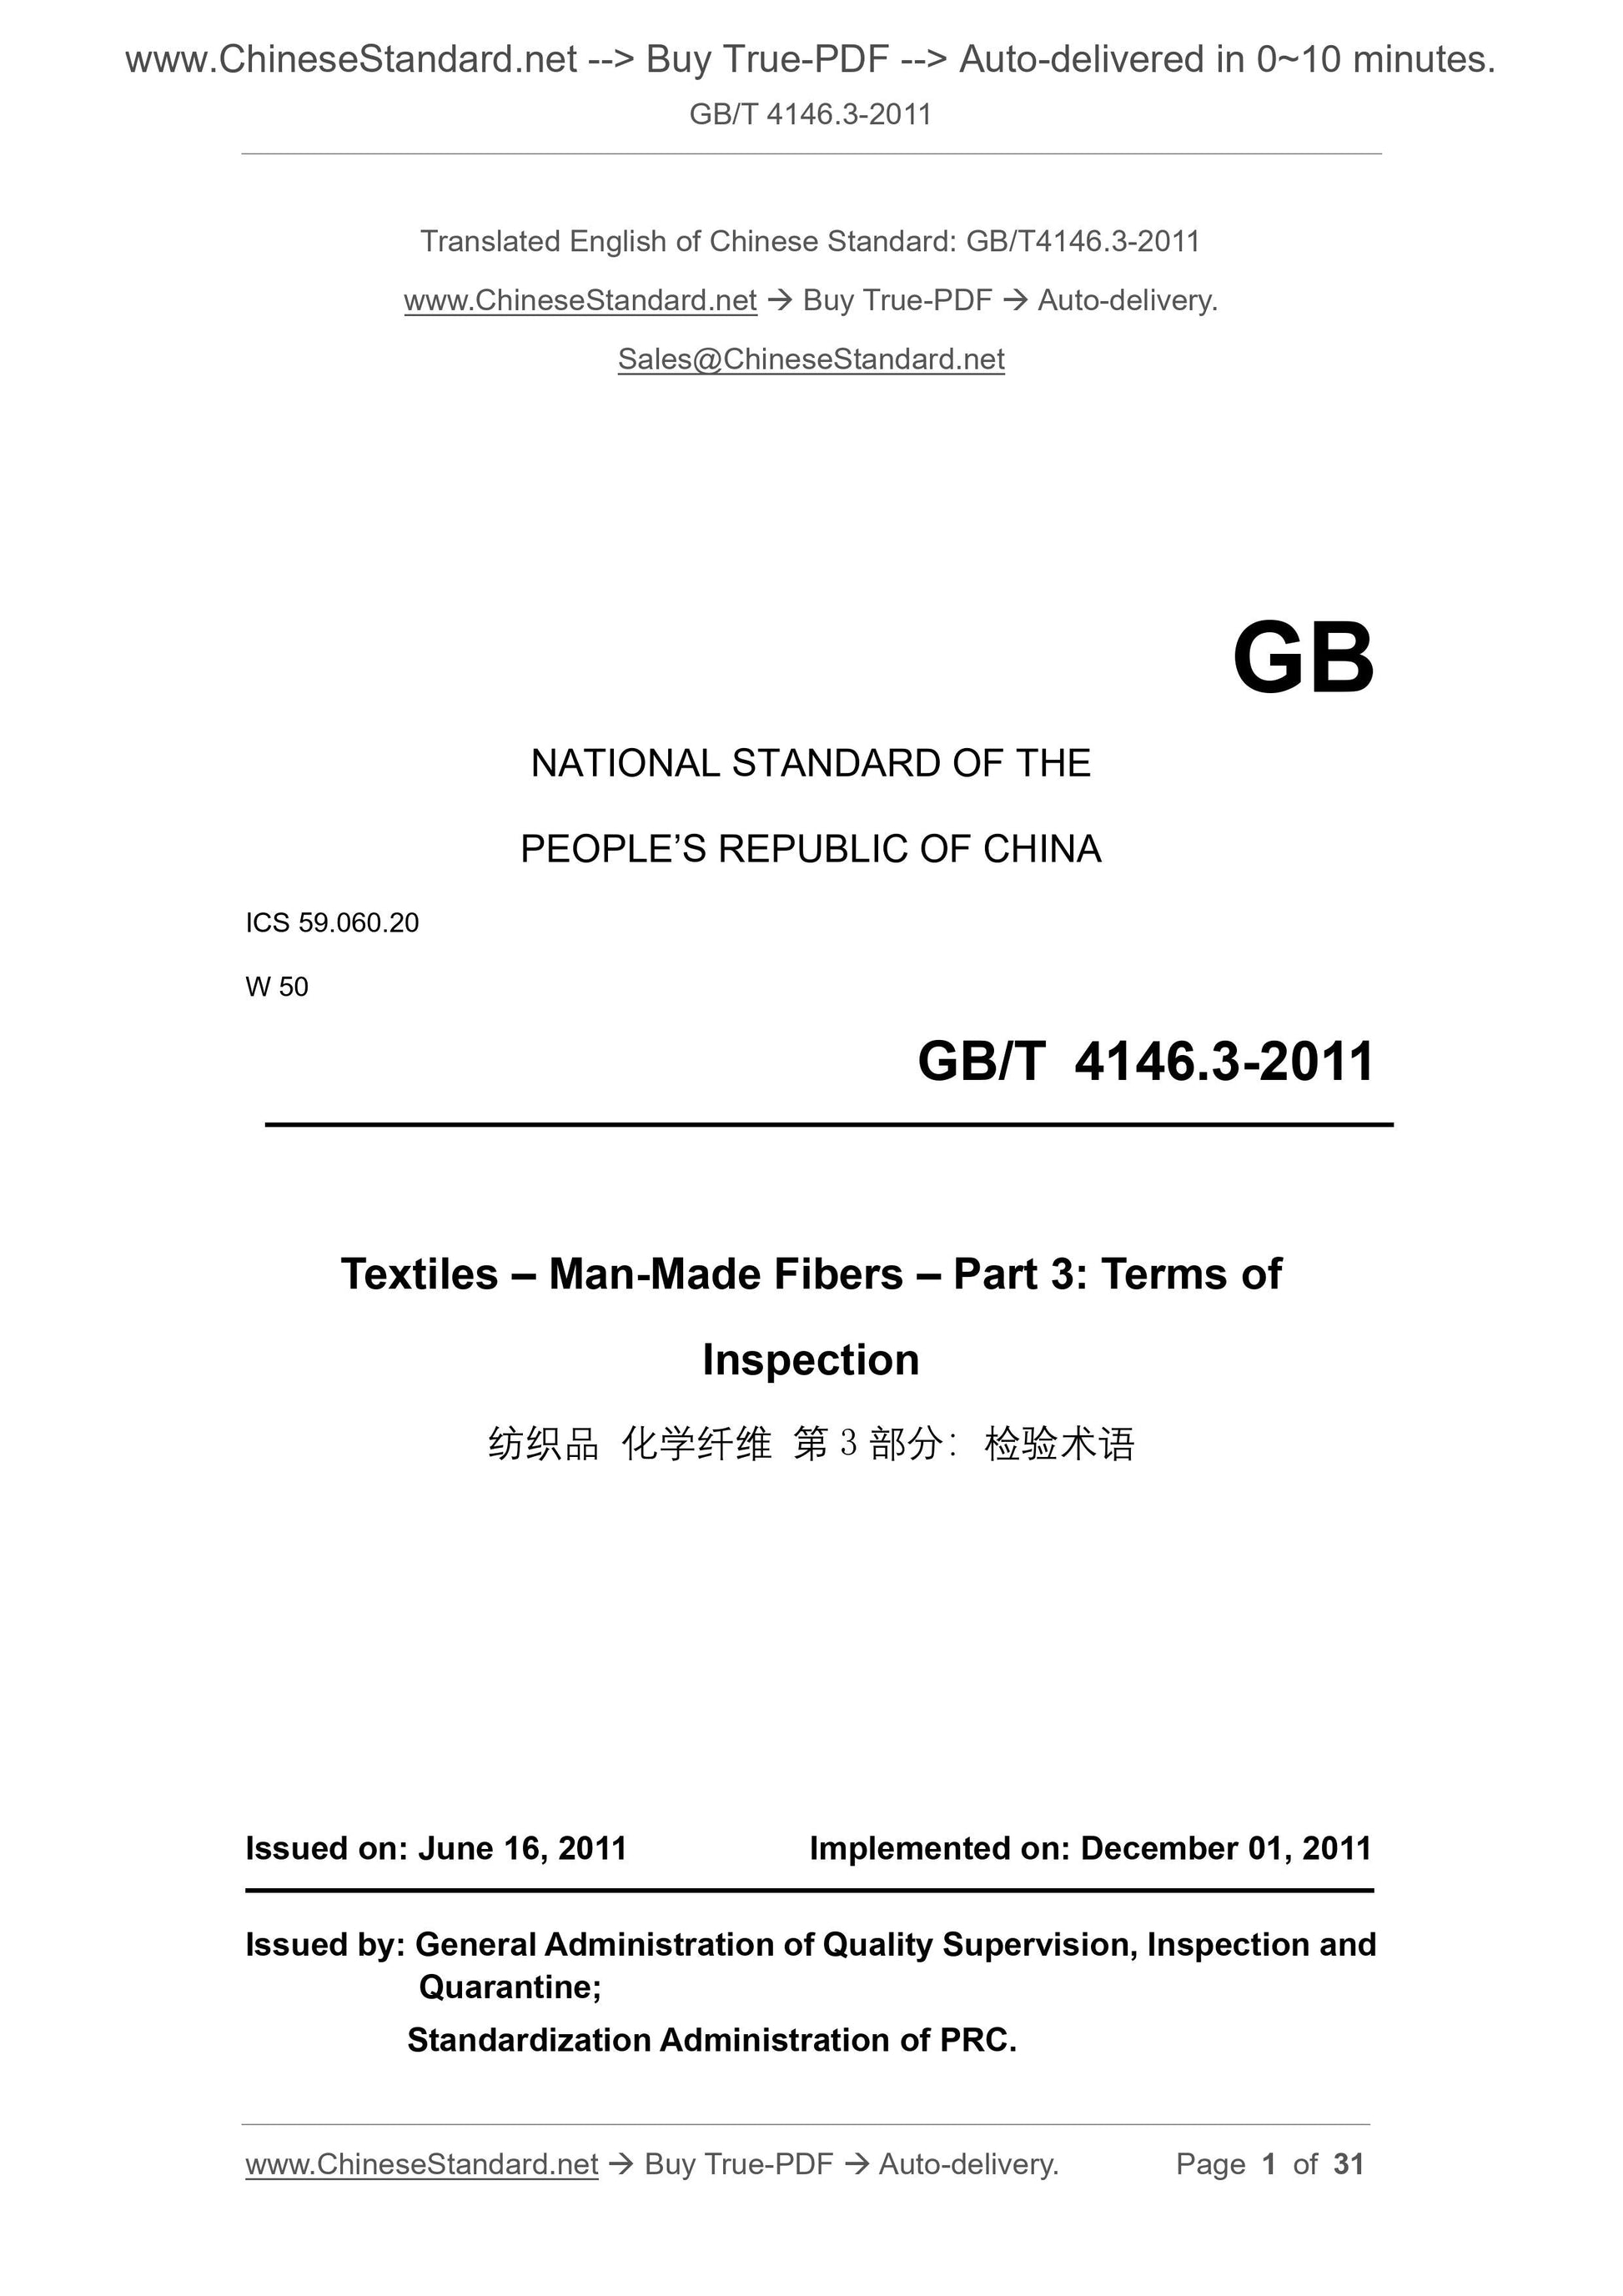 GB/T 4146.3-2011 Page 1